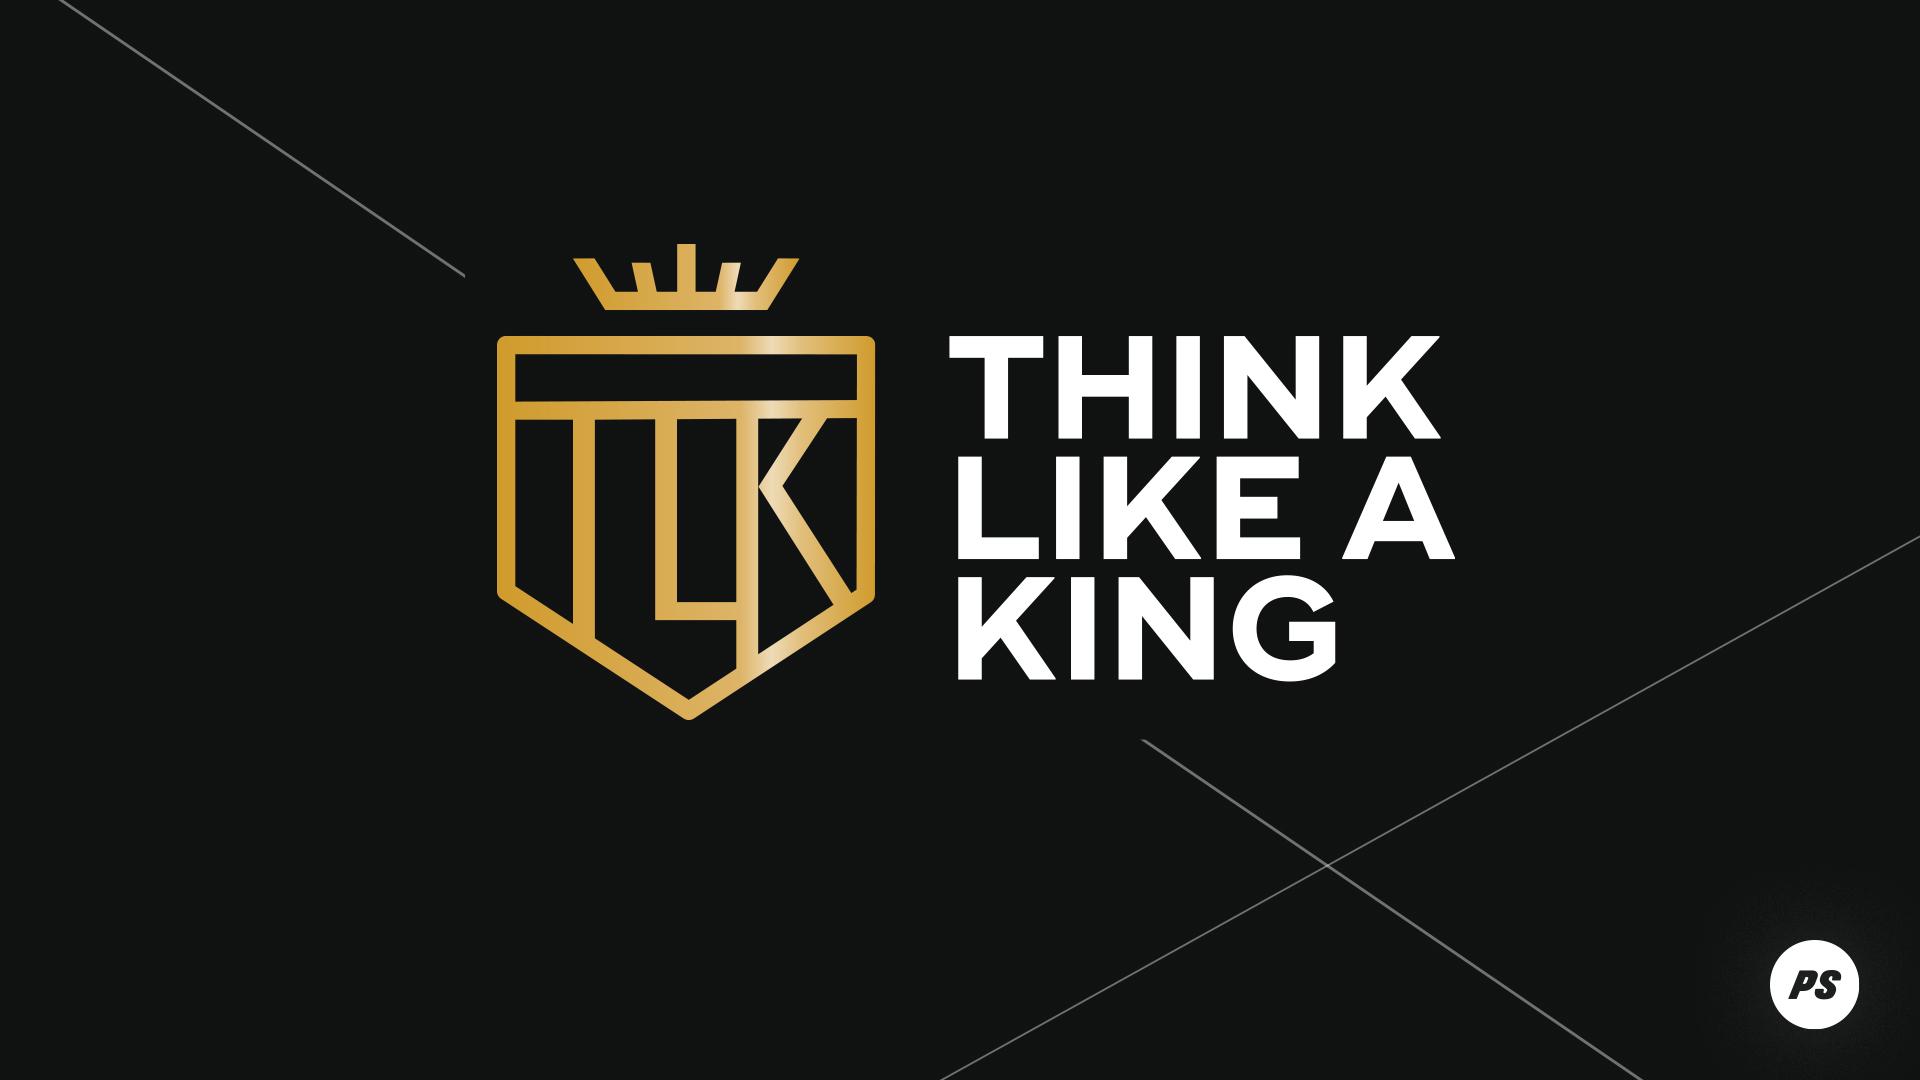 Featured Image for “Think Like A King”